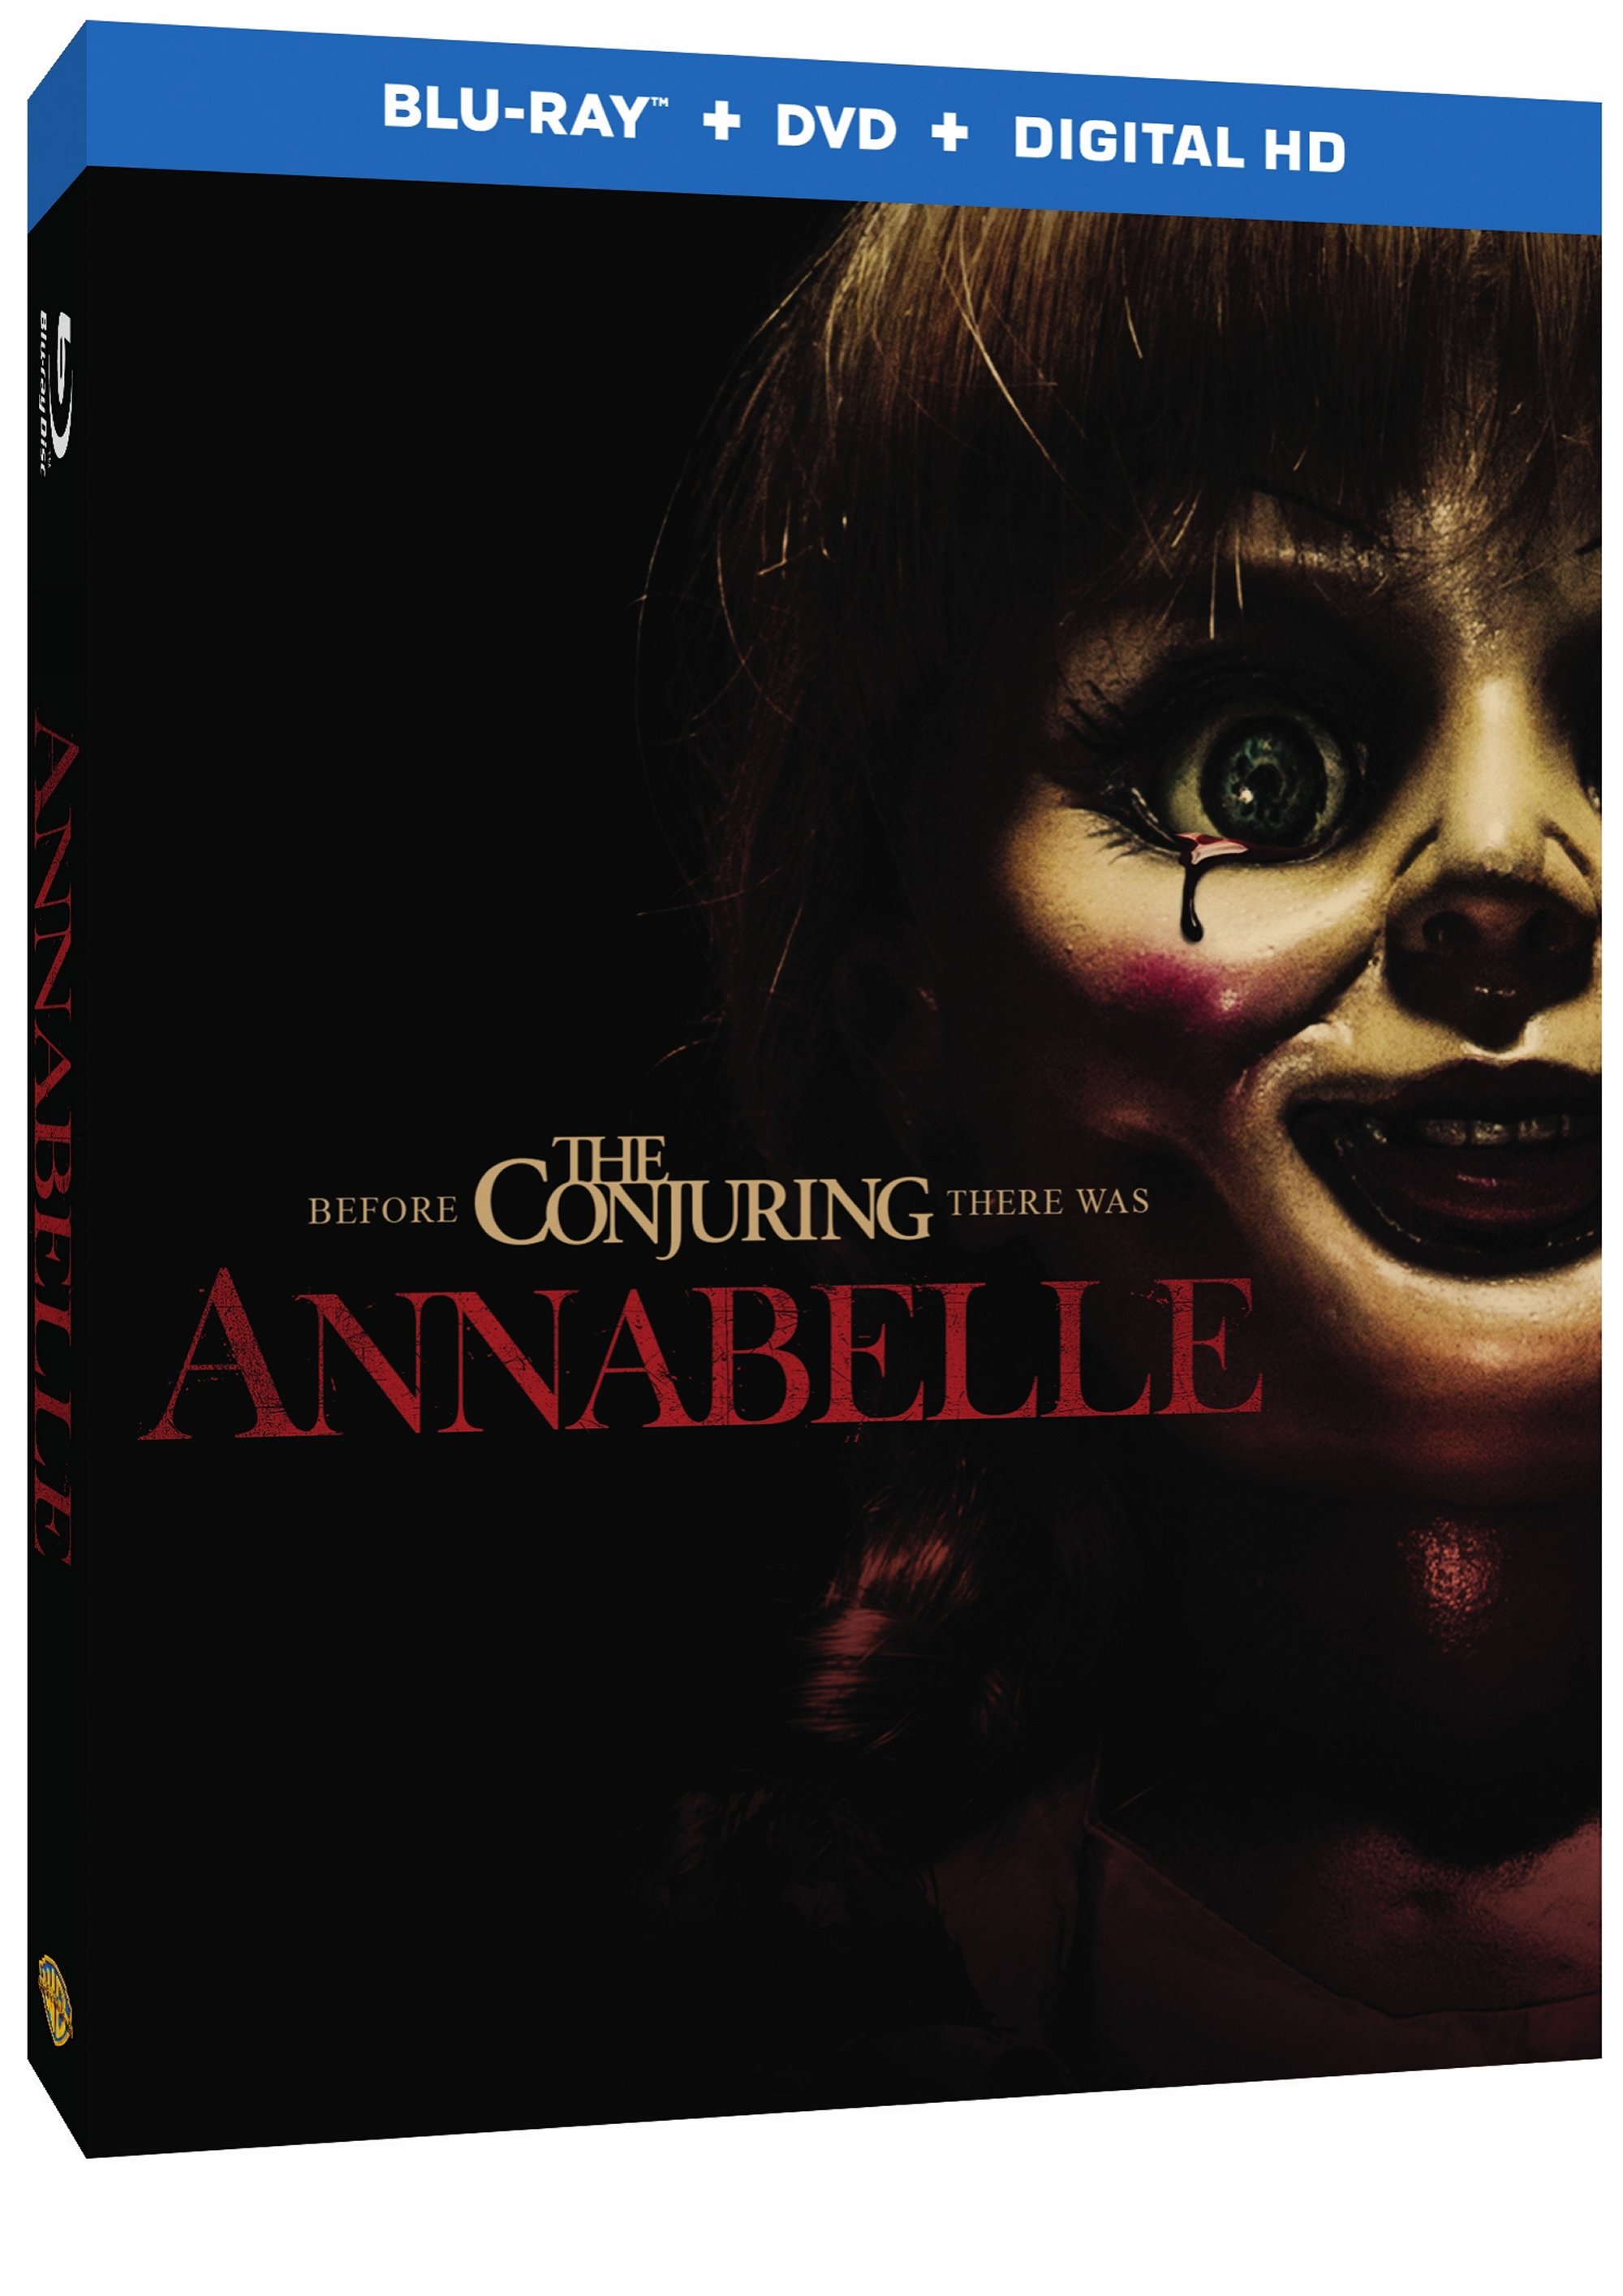 Annabelle Blu-ray Review